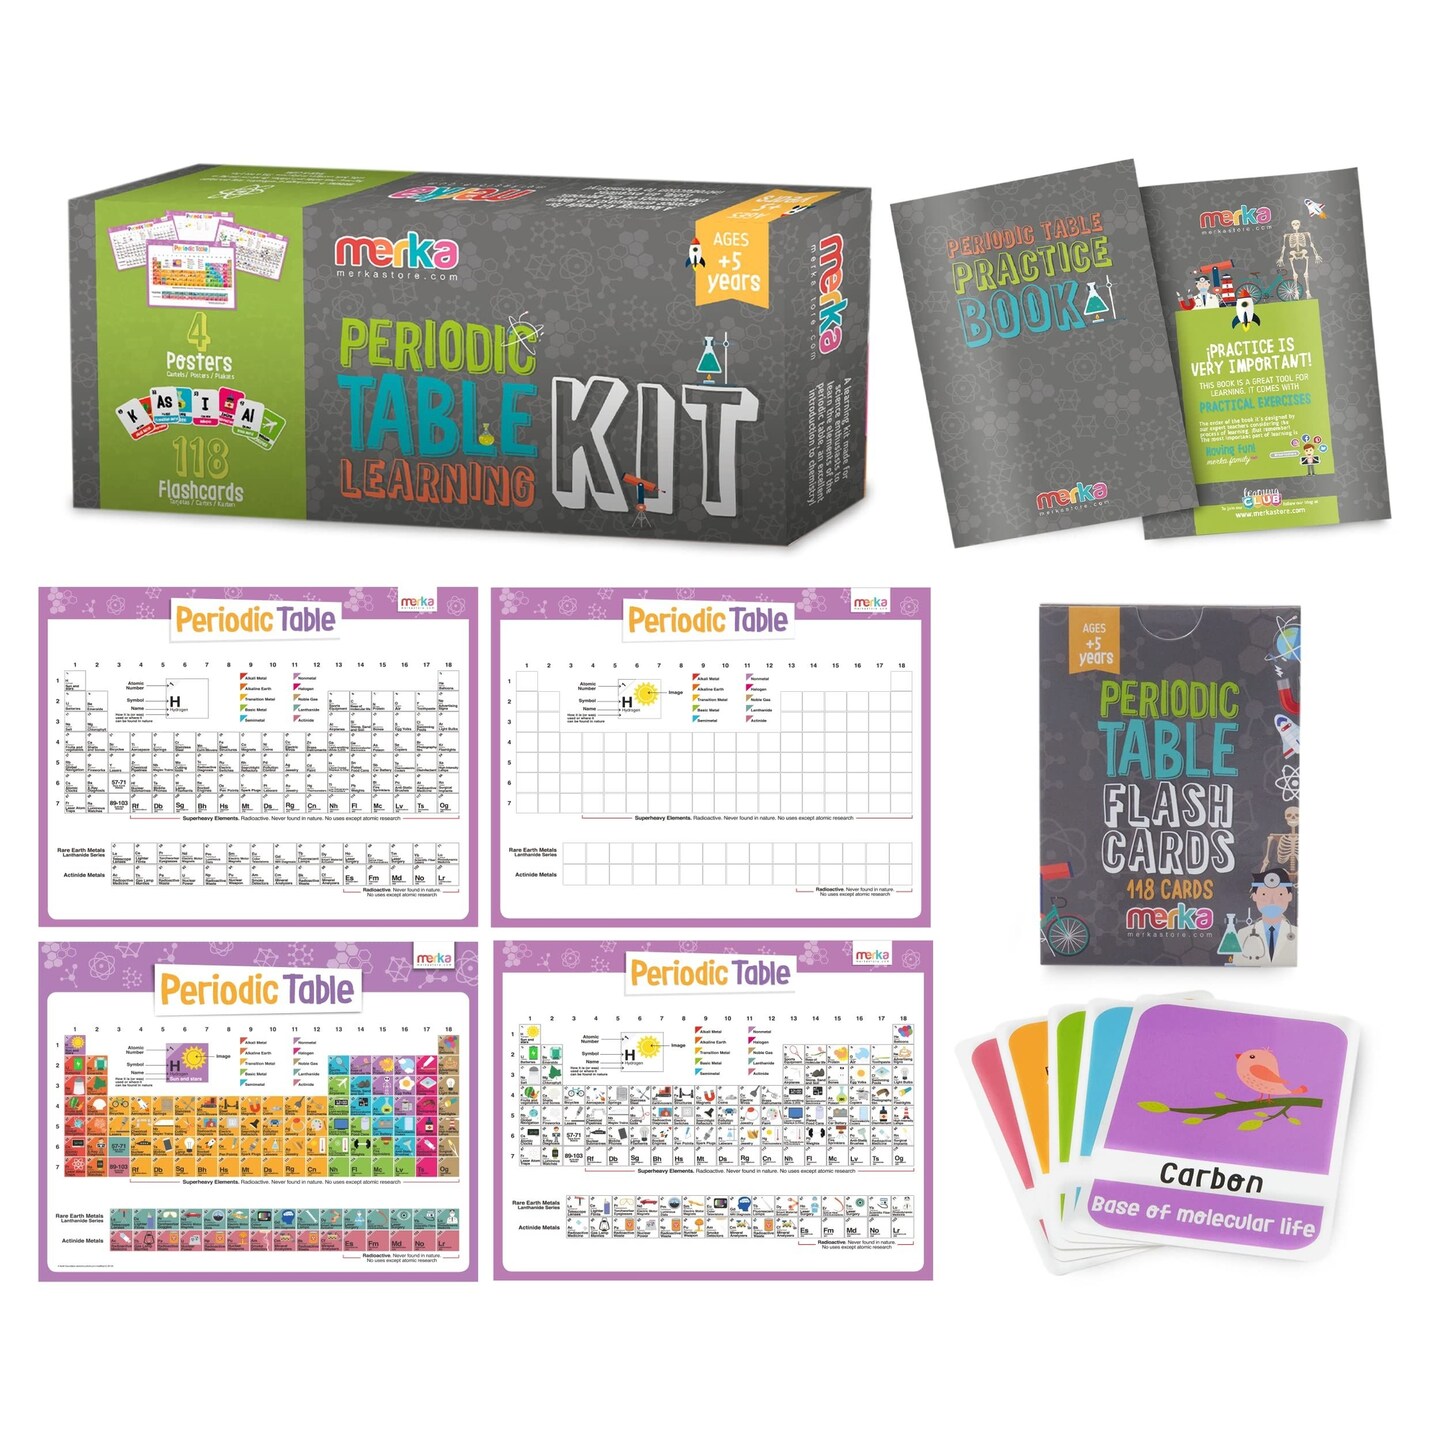 merka Periodic Table For Kids Table Periodic Table Gifts Learning and Educational Toys Chemistry And Science Education Set With 4 Posters 118 Flashcards And Practice Book with Exercises And Puzzles